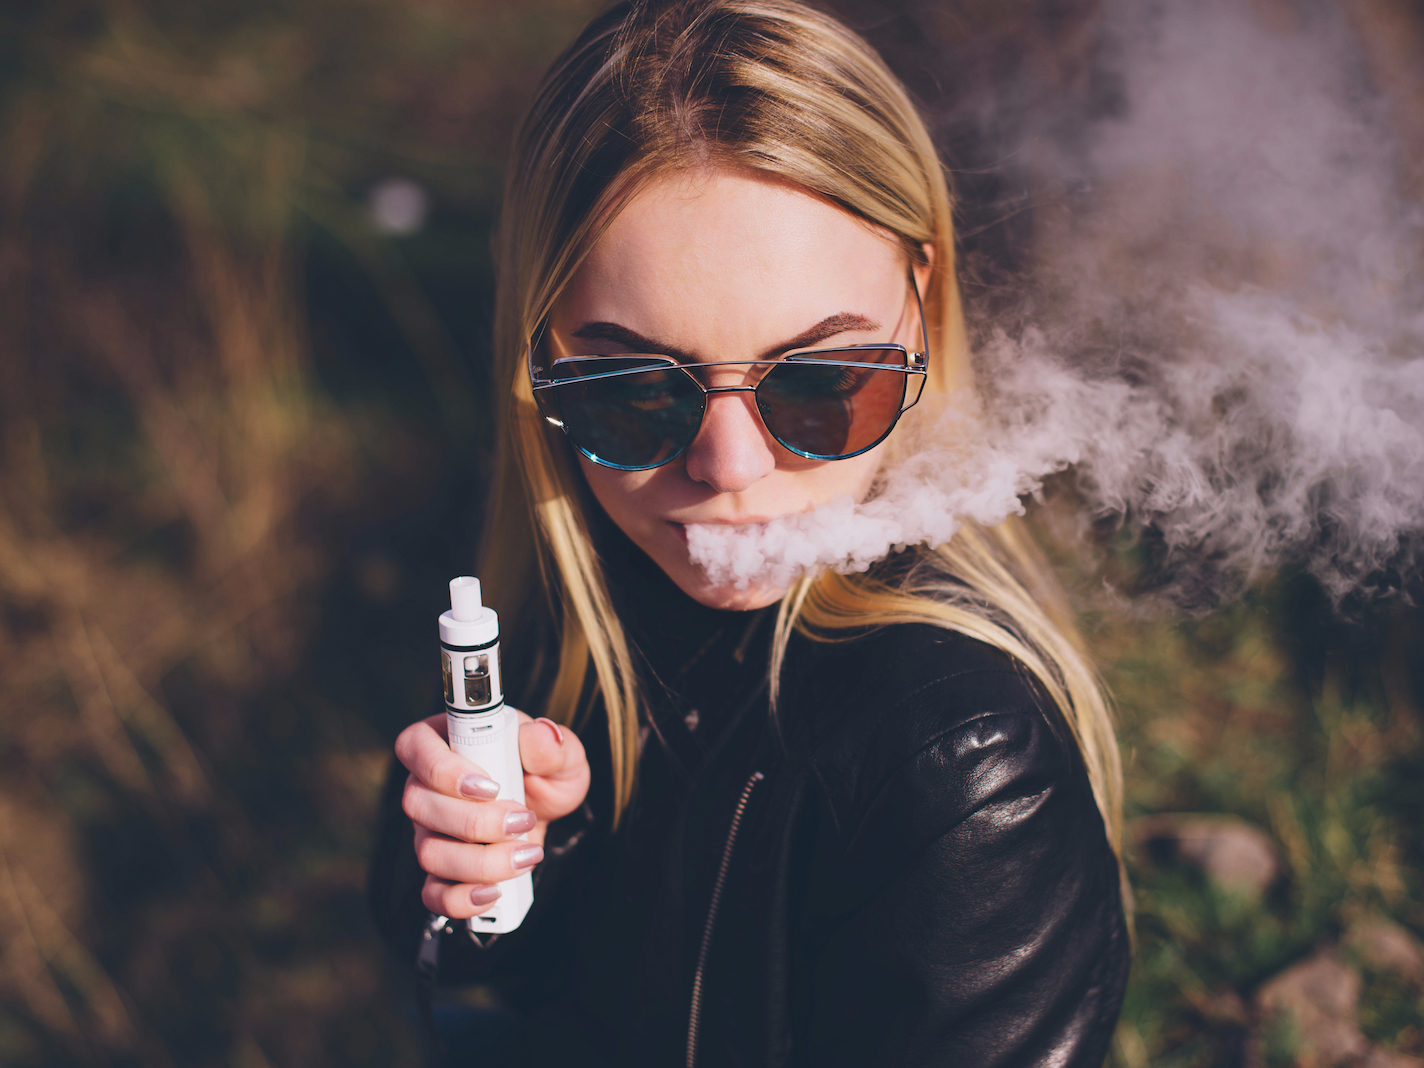 Vaping V.S Smoking – 10 Amazing Vaping Facts You Need to Know